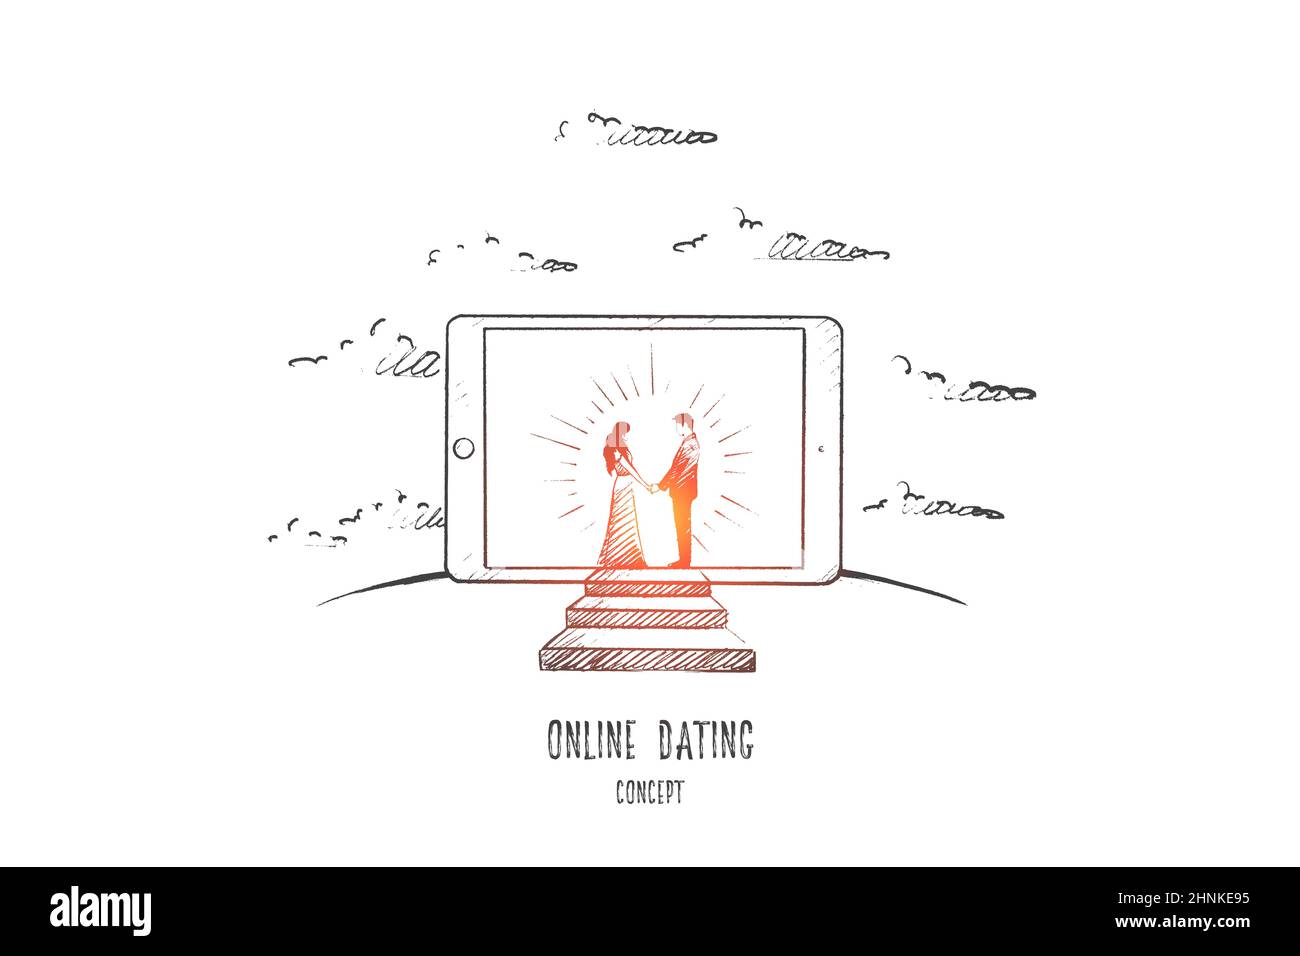 Online dating concept. Hand drawn isolated vector. Stock Photo